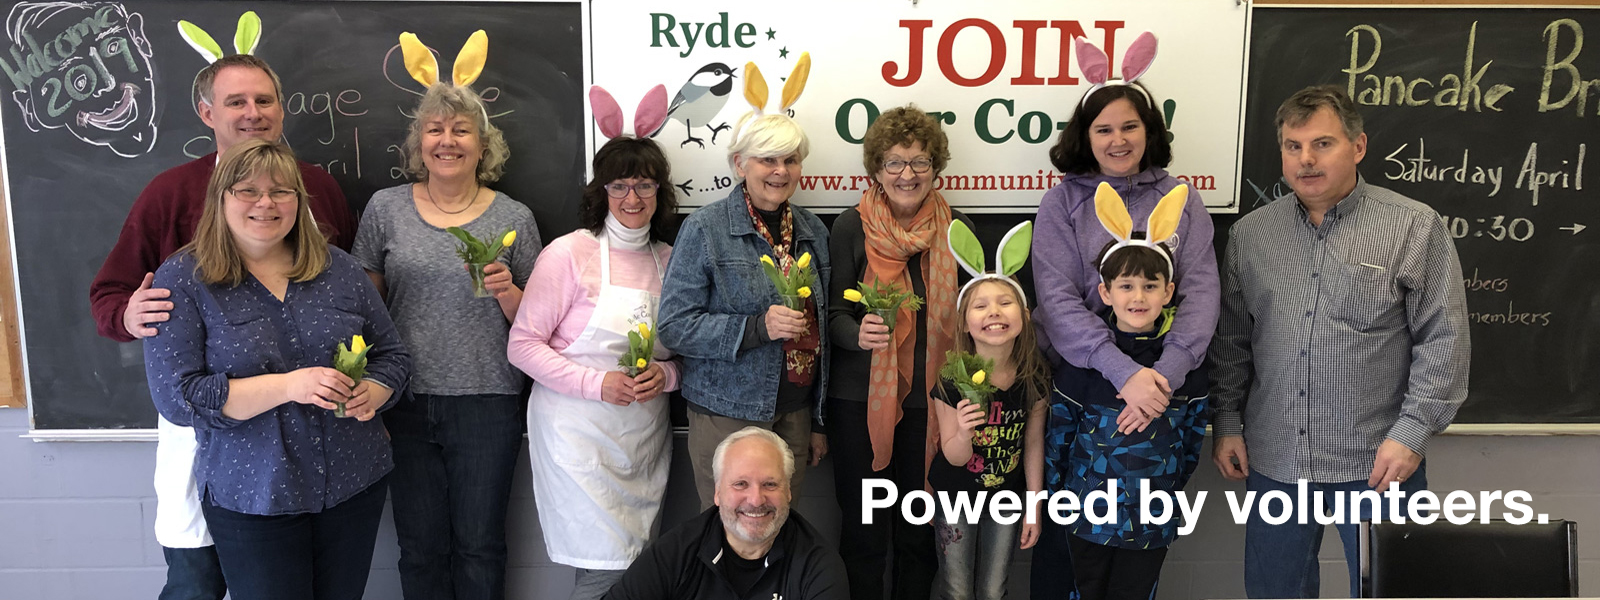 Powered by volunteers the Ryde Community Coop Non Profit